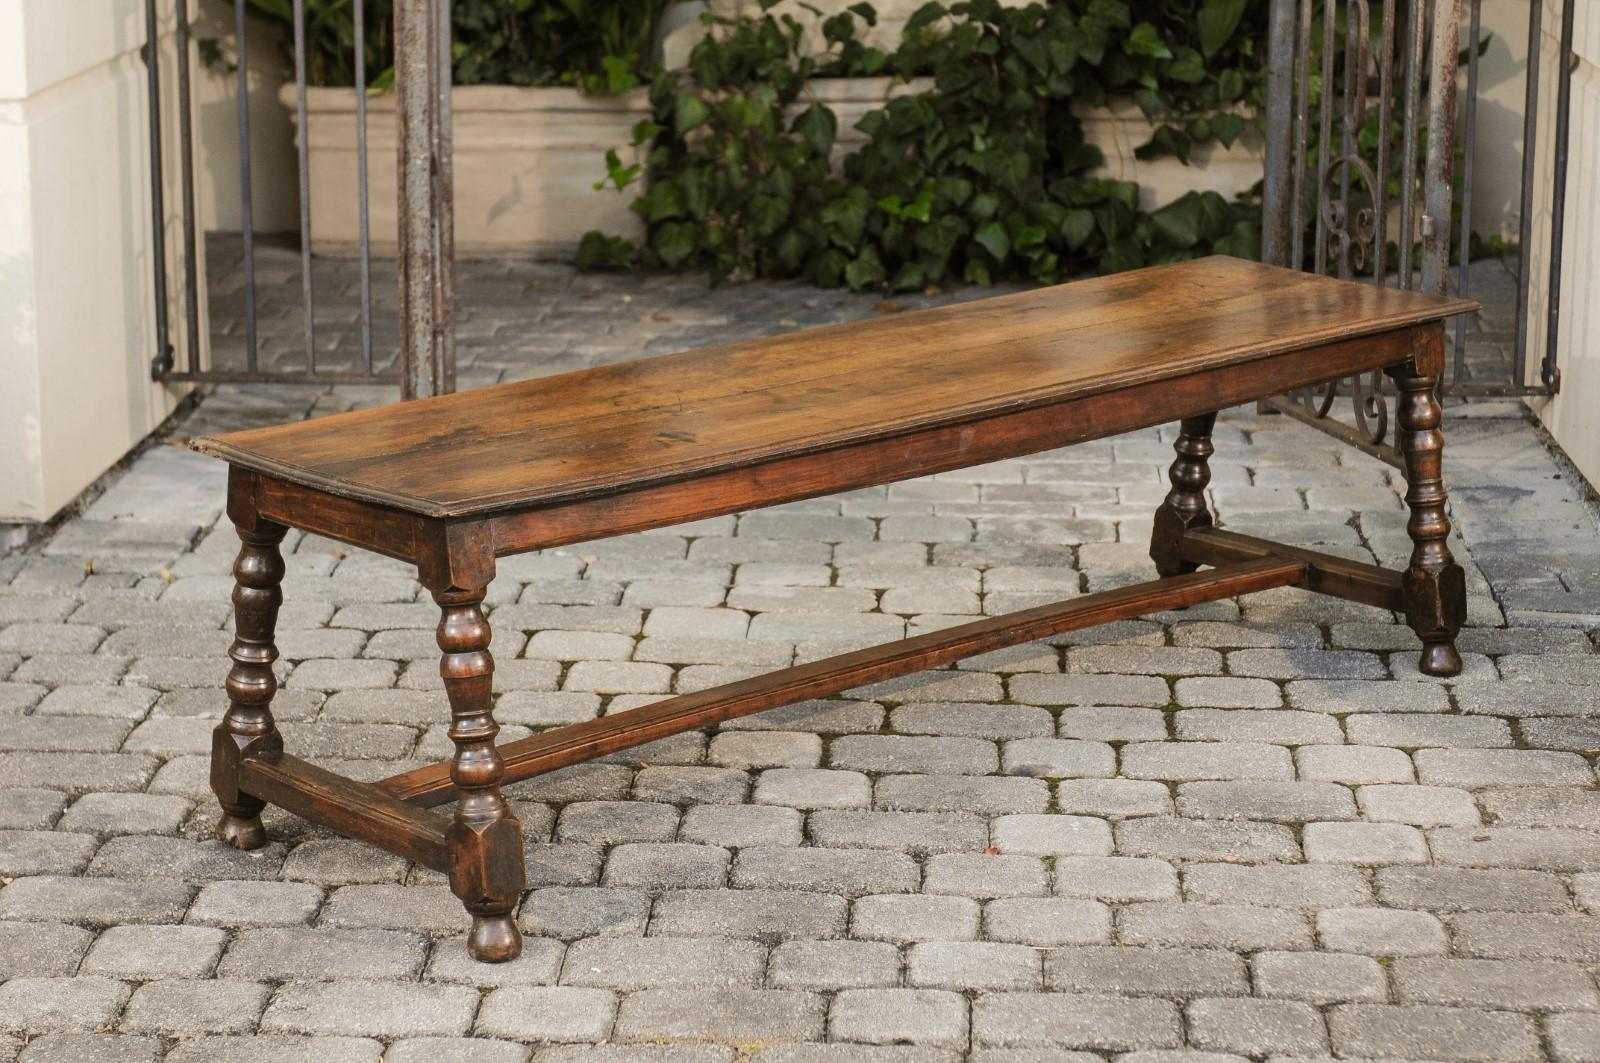 An Italian walnut bench from the early 19th century, with turned legs and cross stretcher. Born in Italy during the early years of the 19th century, this walnut bench features a rectangular top sitting above four splaying turned legs connected to